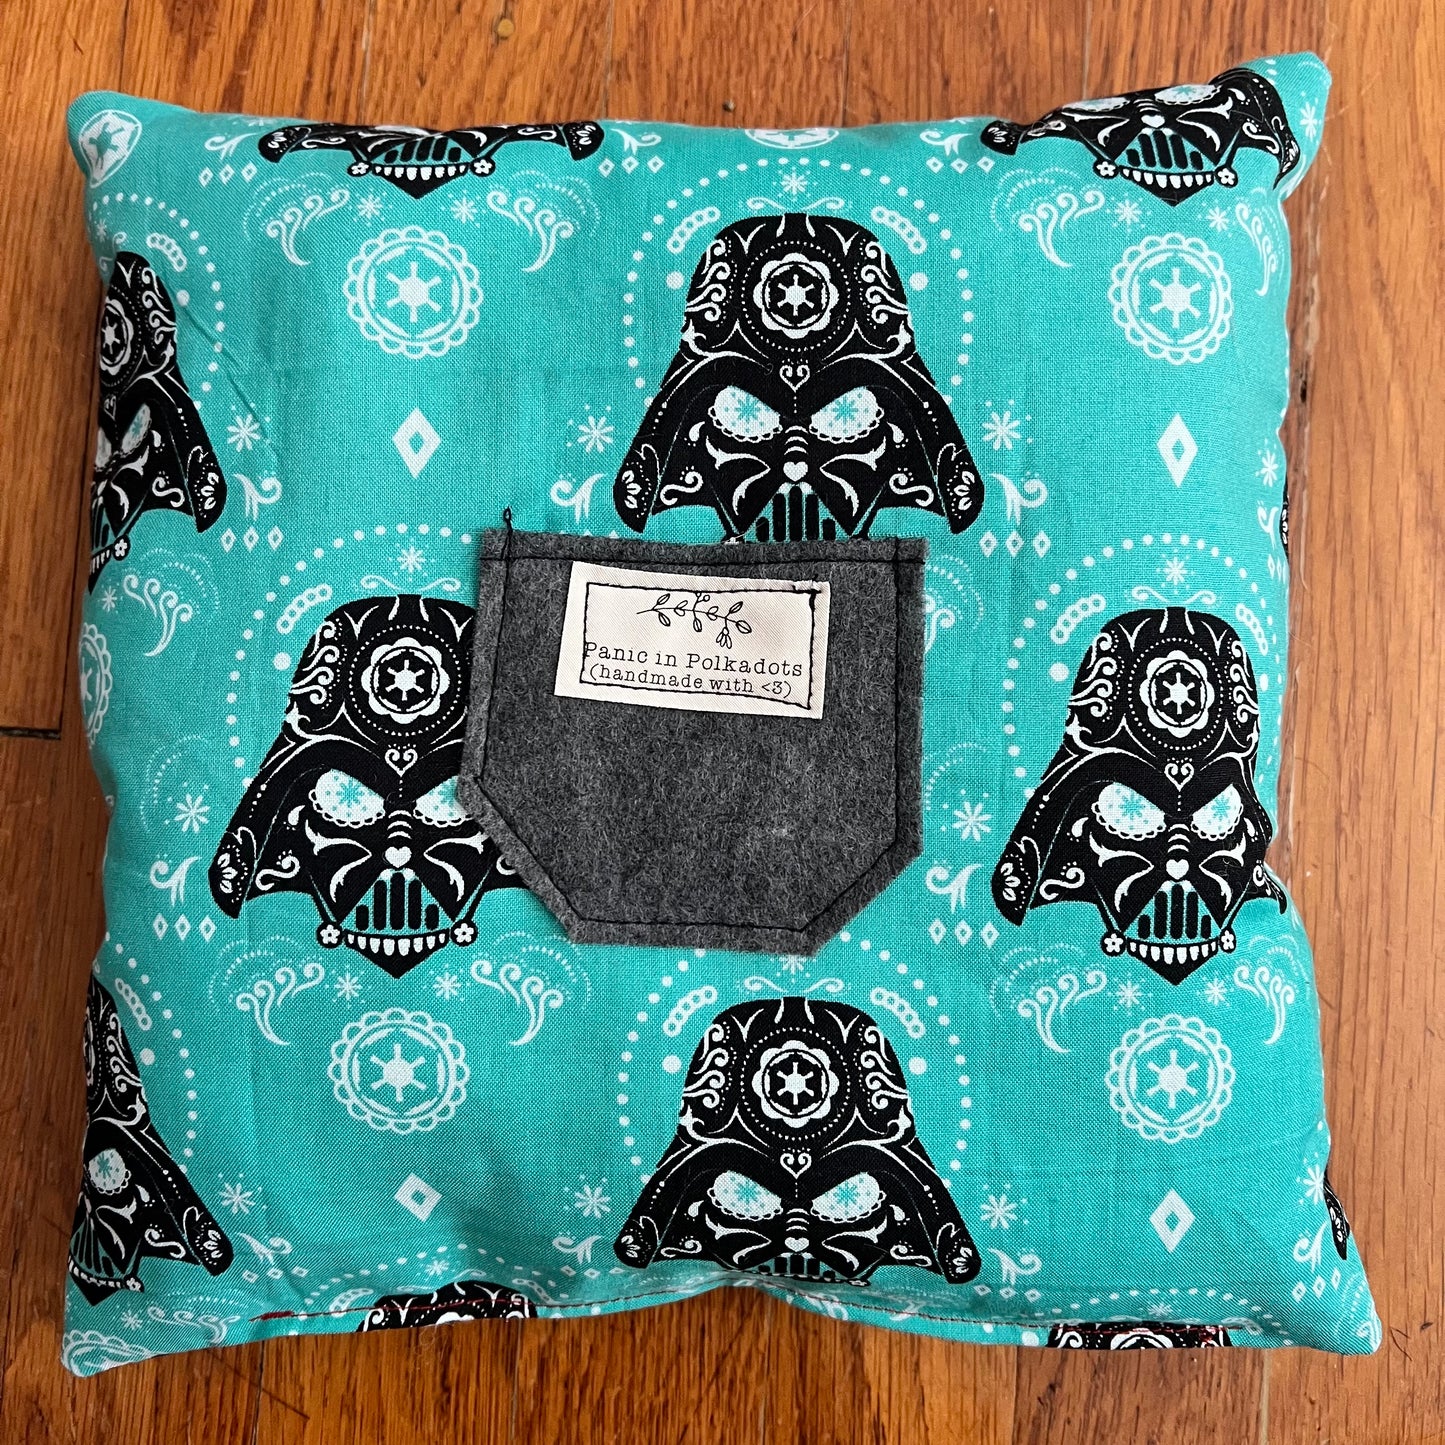 back view of pillow, with Darth Vader print, and a felt grey pocket with Panic label